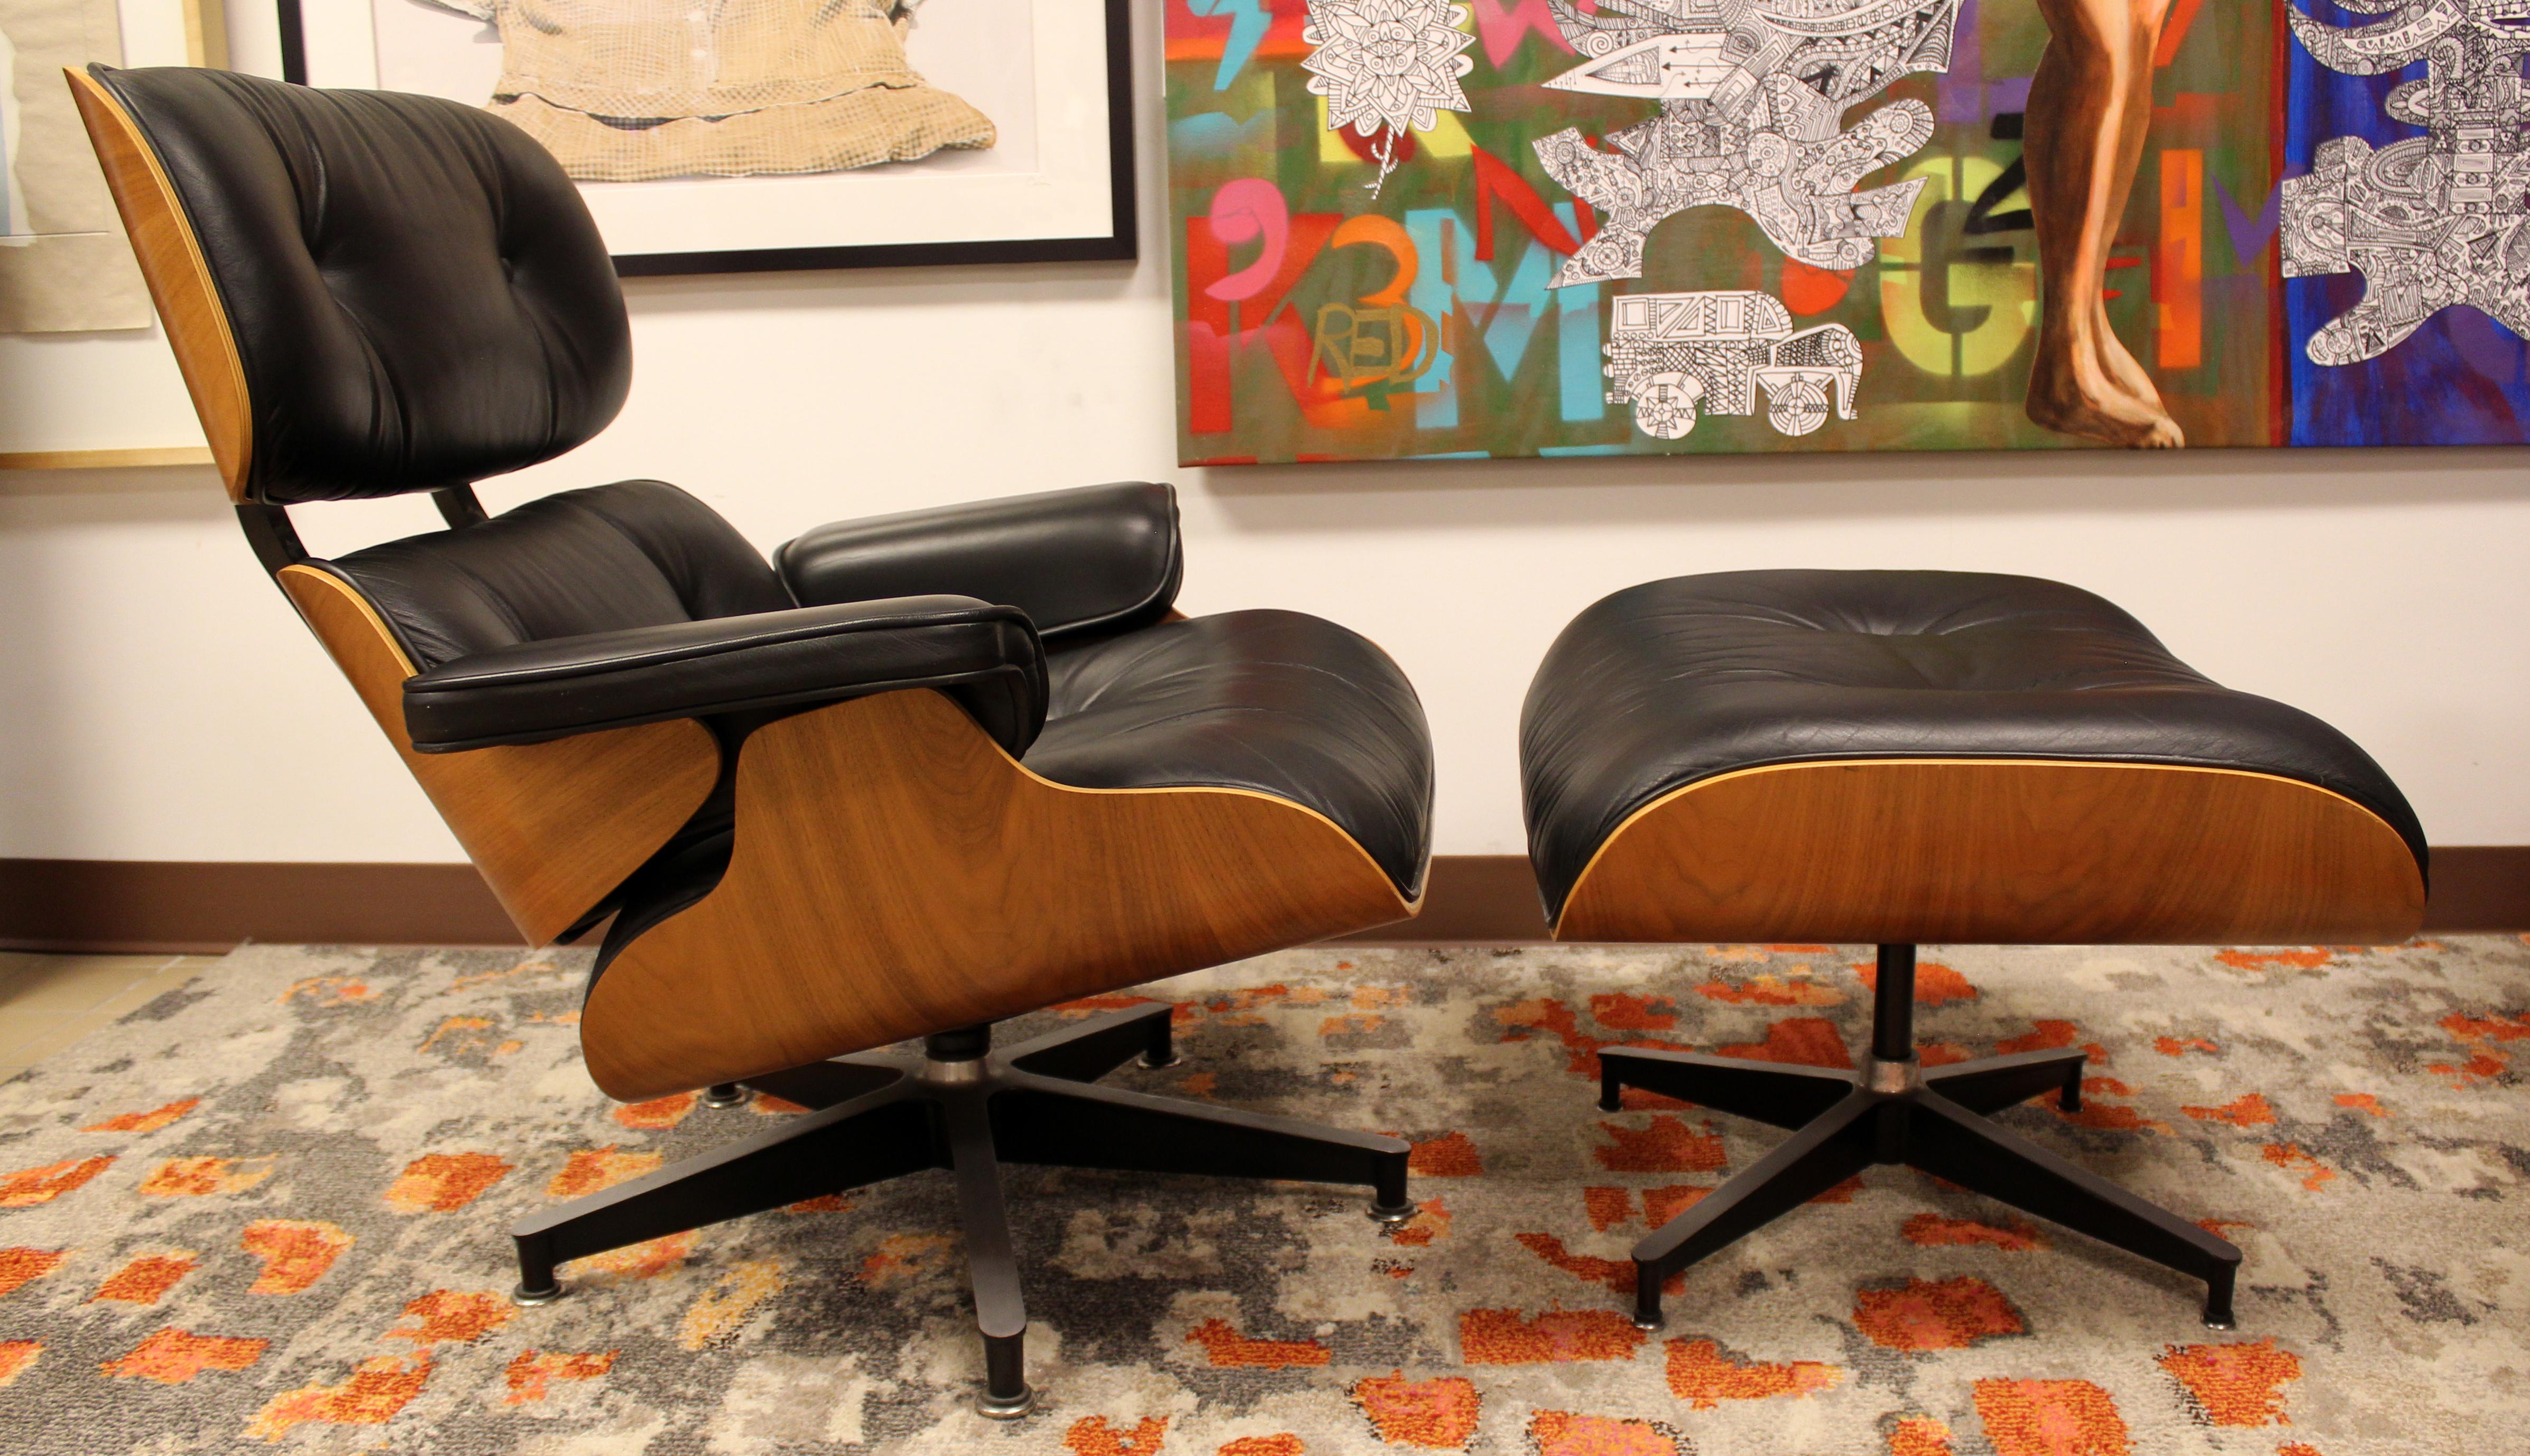 For your consideration is a marvelous, Charles Eames for Herman Miller iconic, walnut and black leather armchair and matching ottoman, circa 1980s. In excellent condition. The dimensions of the chair are 33